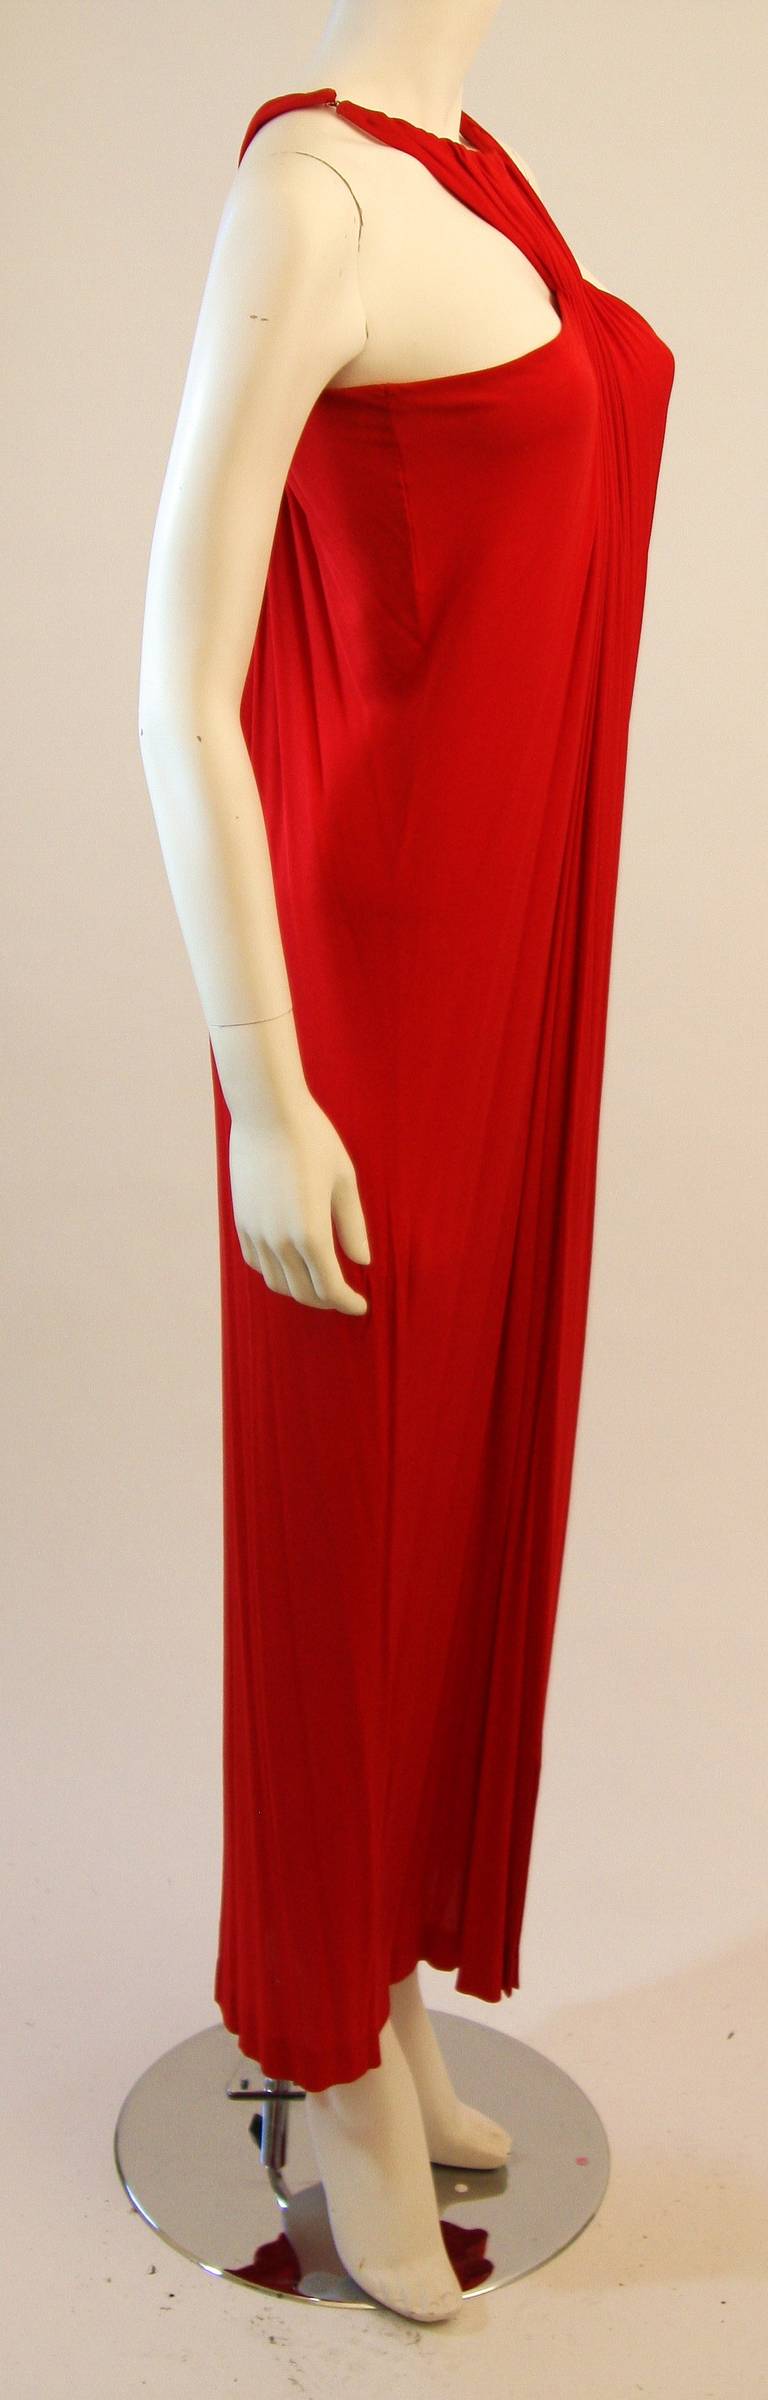 Gorgeous Red Jersey Dress with Gathers and Racer Style Halter In Excellent Condition For Sale In Los Angeles, CA